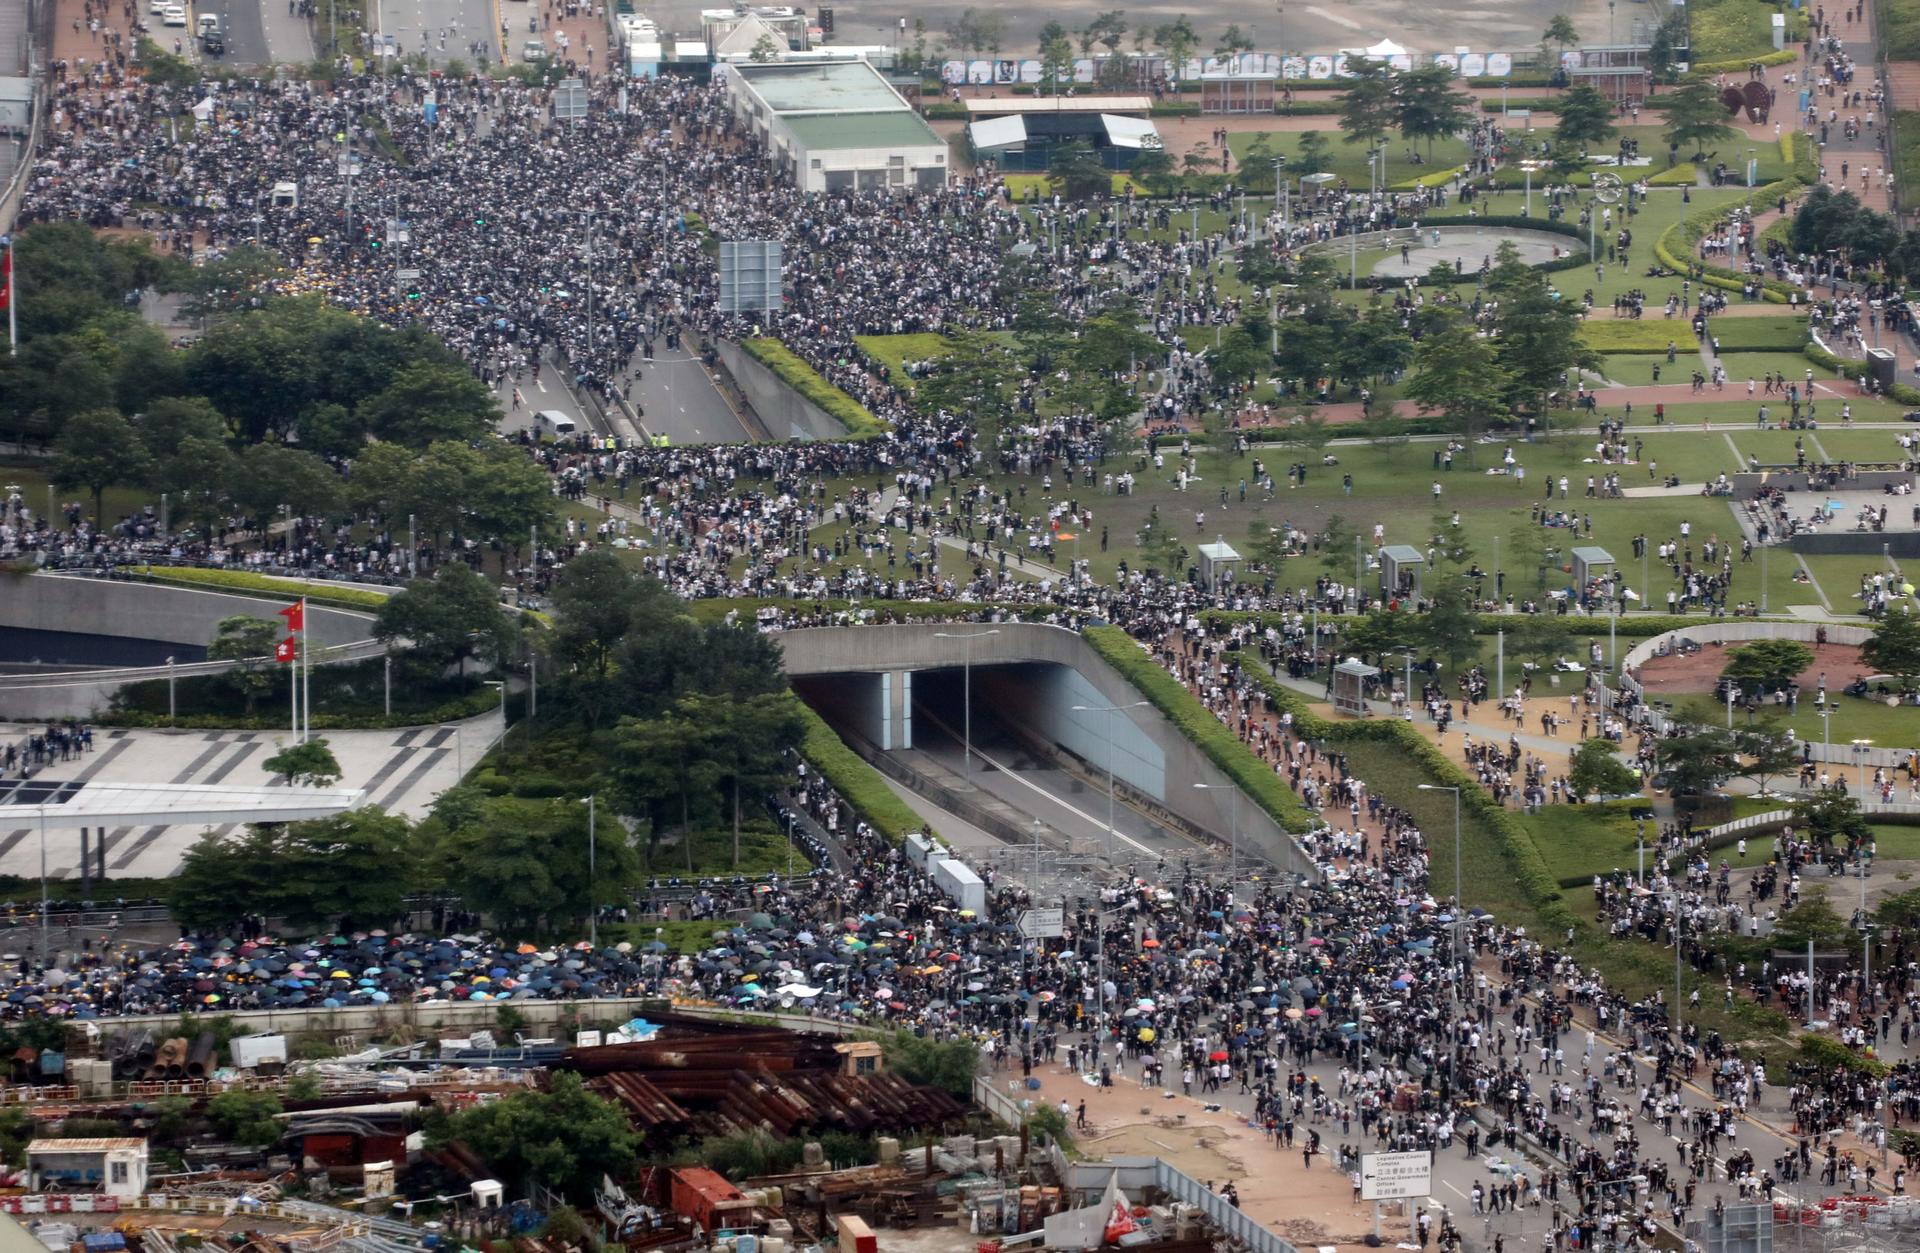 Thousands of demonstrators are shown crowding a main road in Hong Kong in a photo taking from several stories up through a window.